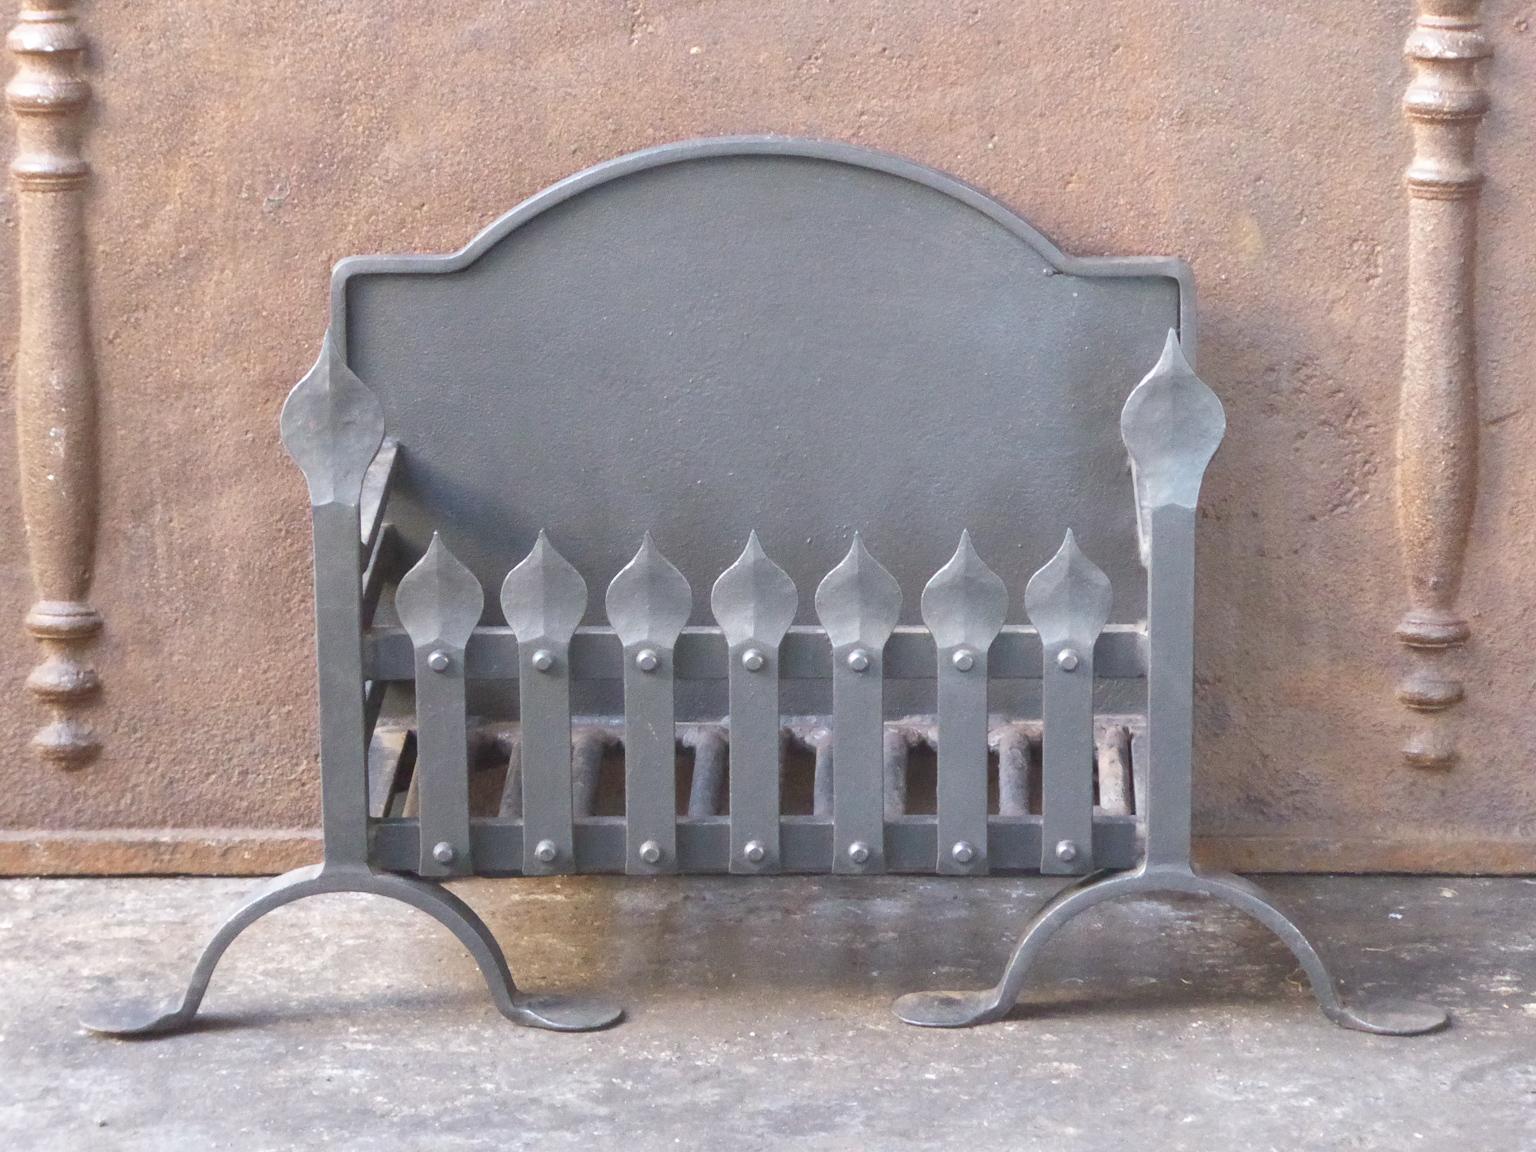 English modernist fireplace basket or fire basket. The fireplace grate is made of wrought iron. The total width of the front of the grate is 27 inch (68 cm).

















 